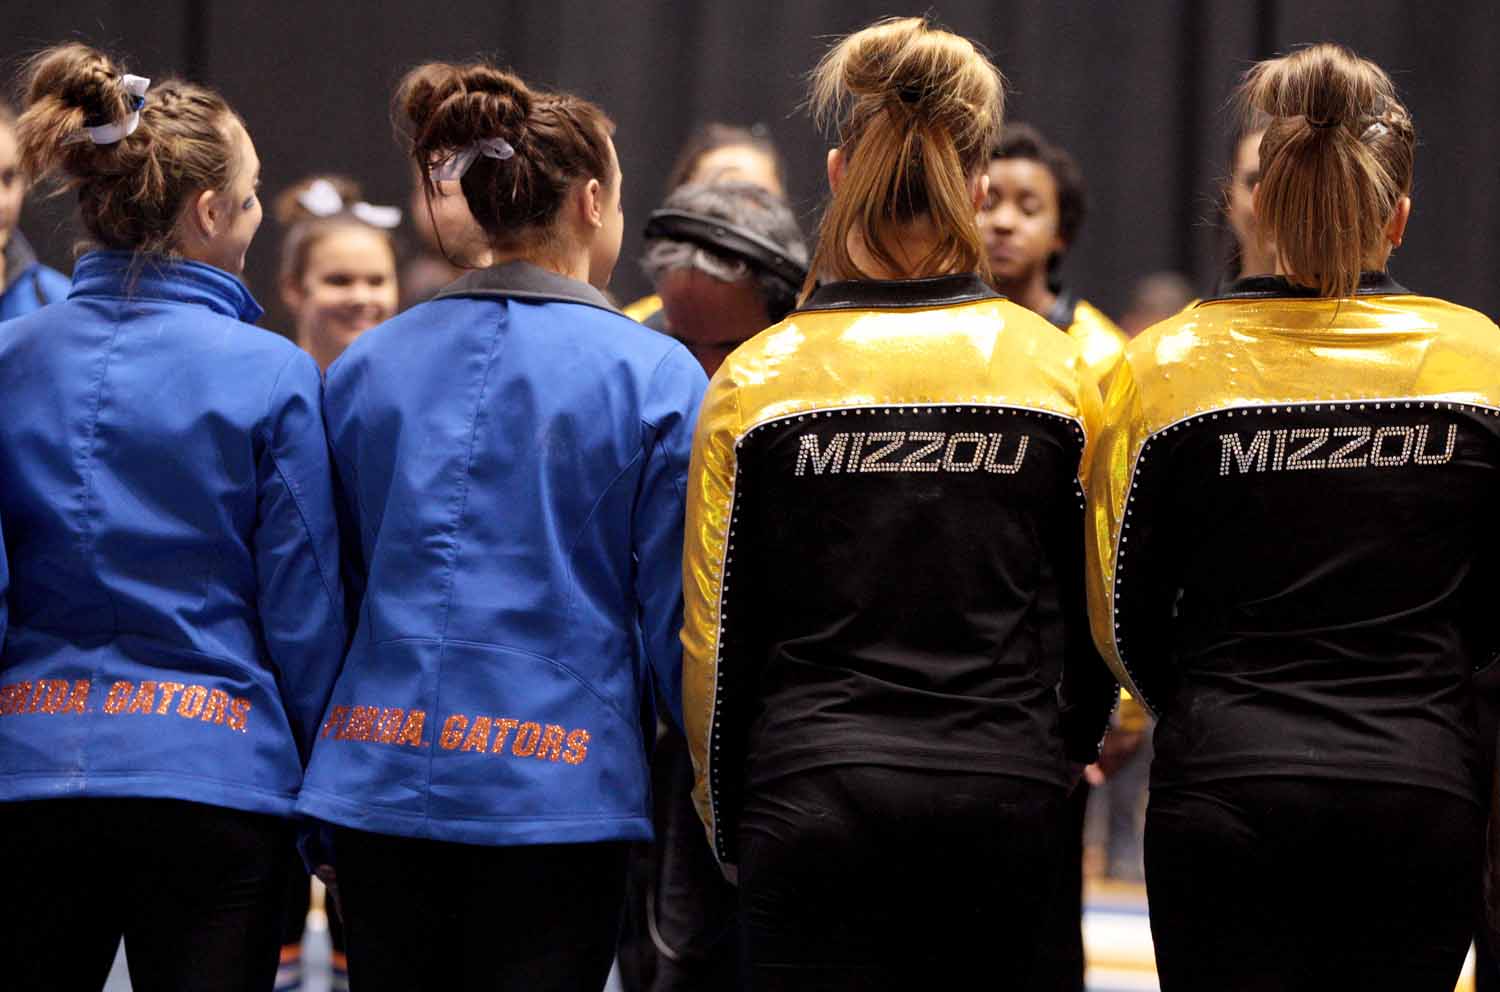 University of Florida gymnastics team members stand in a circle with University of Missouri gymnastics team members following the announcement of awards Friday evening, Feb. 19, 2016 at the Hearnes Center.